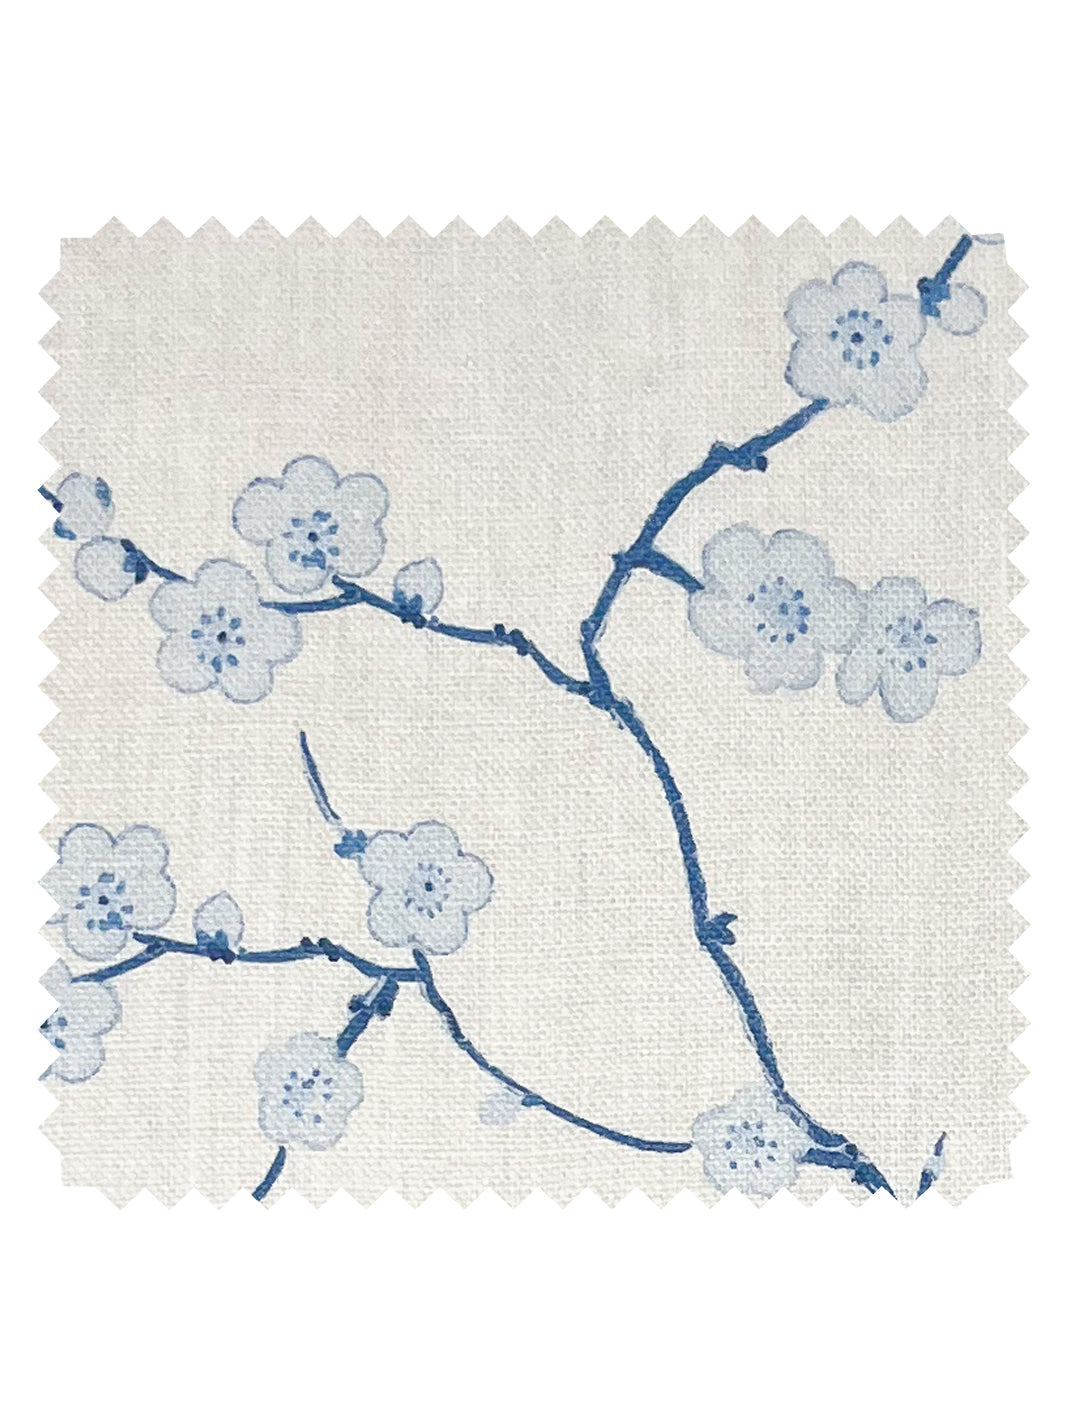 'Cherry Blossom' Linen Fabric by Nathan Turner - Blue